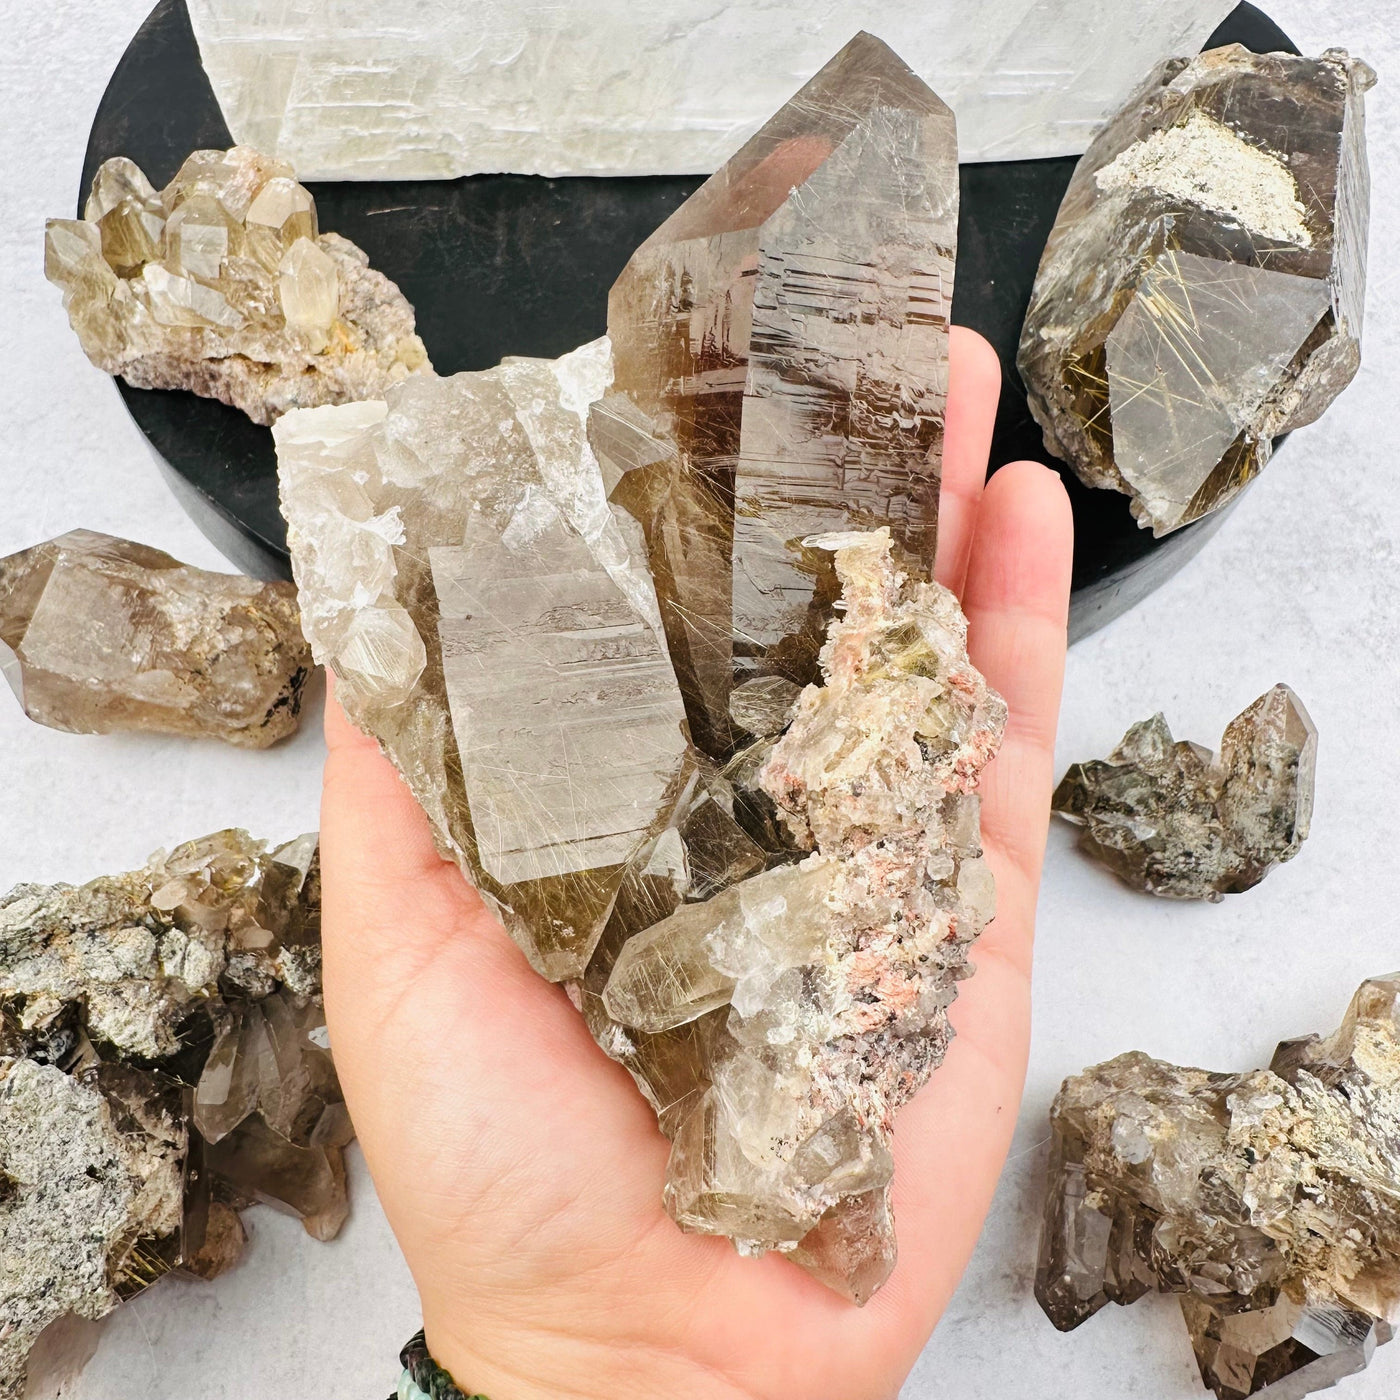 Natural Smoky Quartz Cluster with Rutilated inclusions - High Quality in hand for size reference 